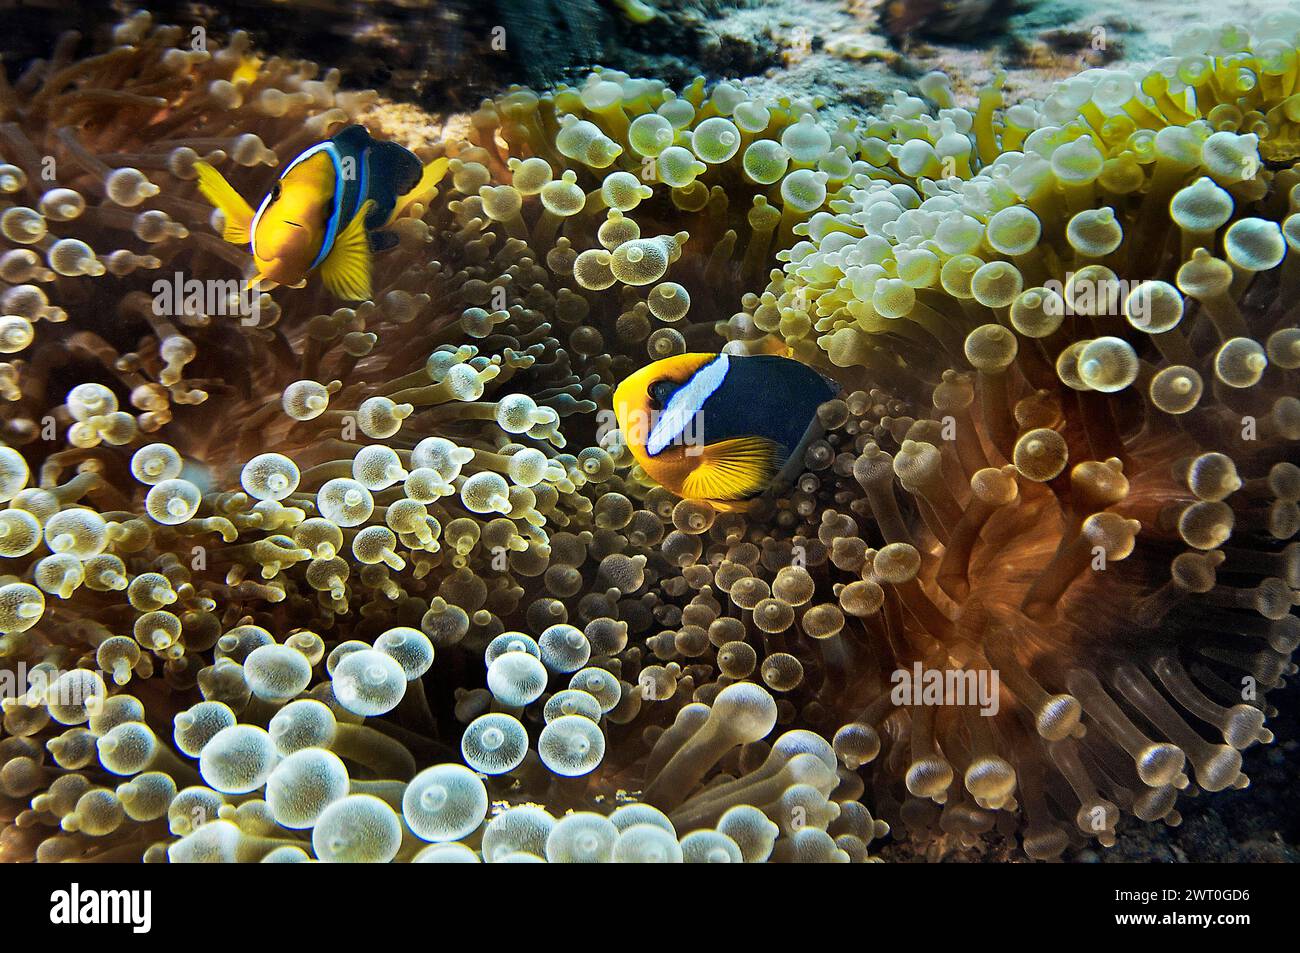 Blue-banded anemonefish (Amphiprion crysopterus), in magnificent sea anemone (Heteractis magnifica), Vakarufalhi, Ari Atoll, Maldives, Indian Ocean Stock Photo